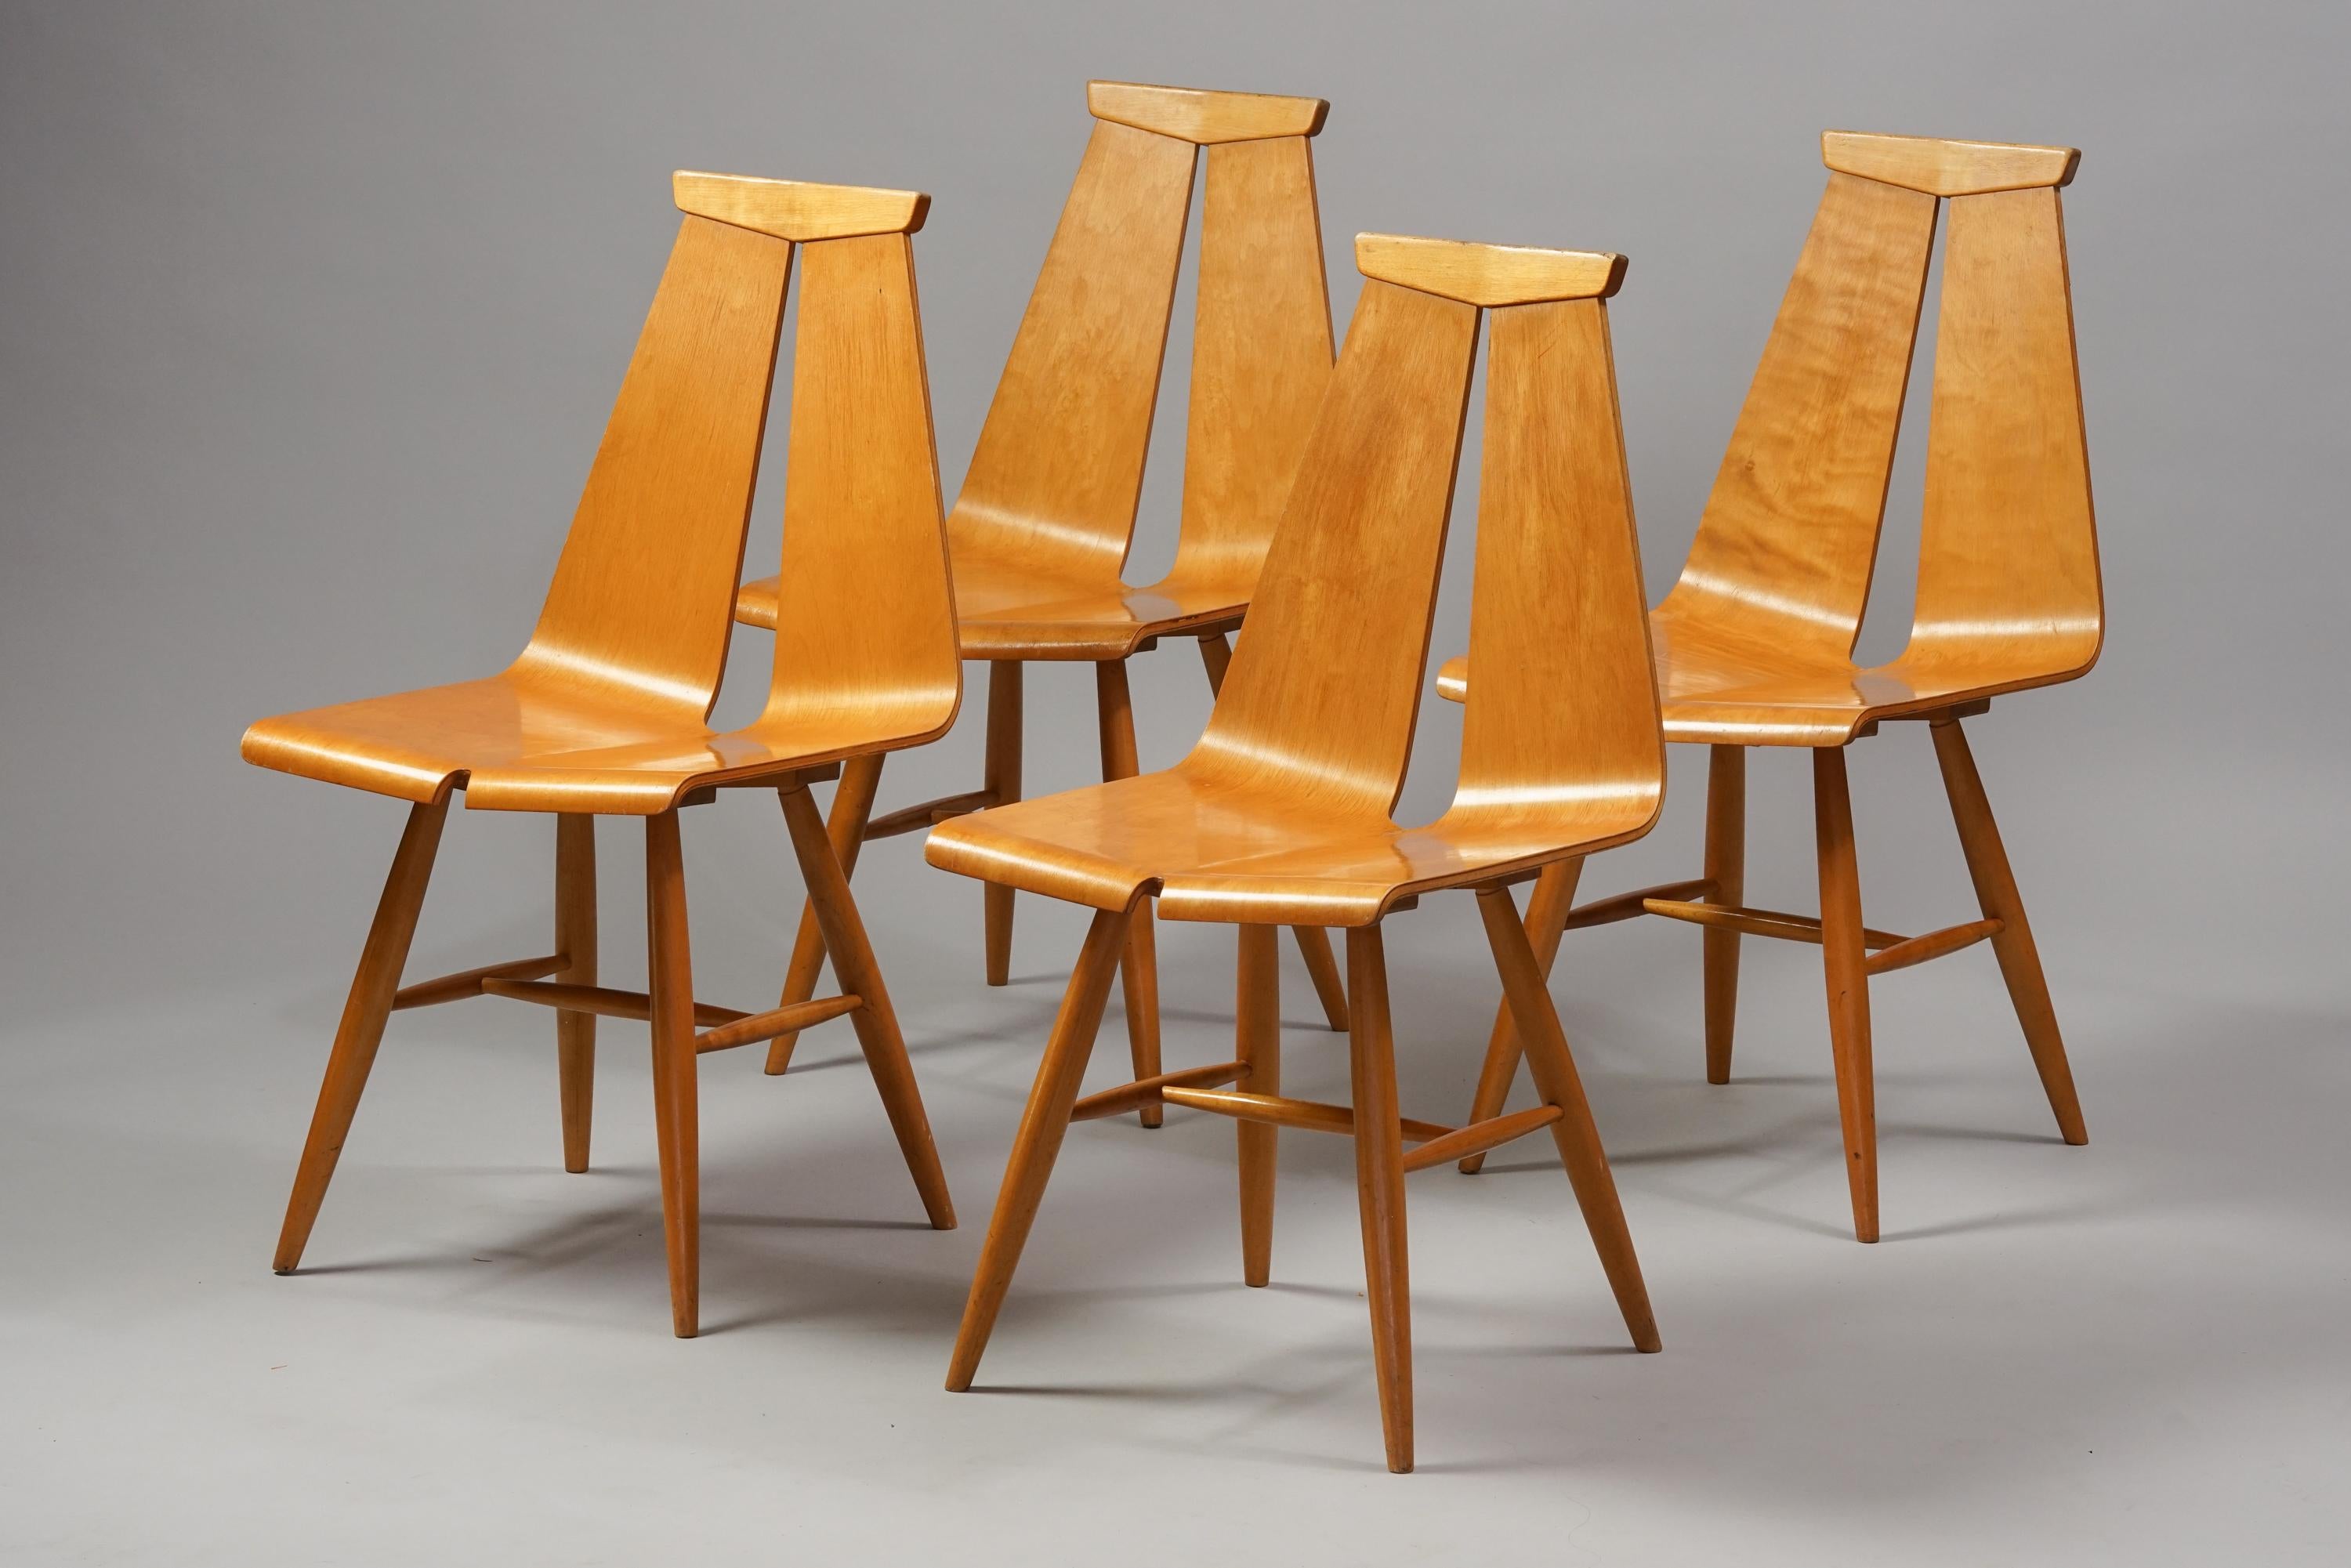 Set of 4 model 441 dining chairs by Risto Halme for Isku from the 1960s. Birch, good vintage condition, minor wear consistent with age and use. Great patina on the birch chairs. The chair are sold as a set. Iconic design.